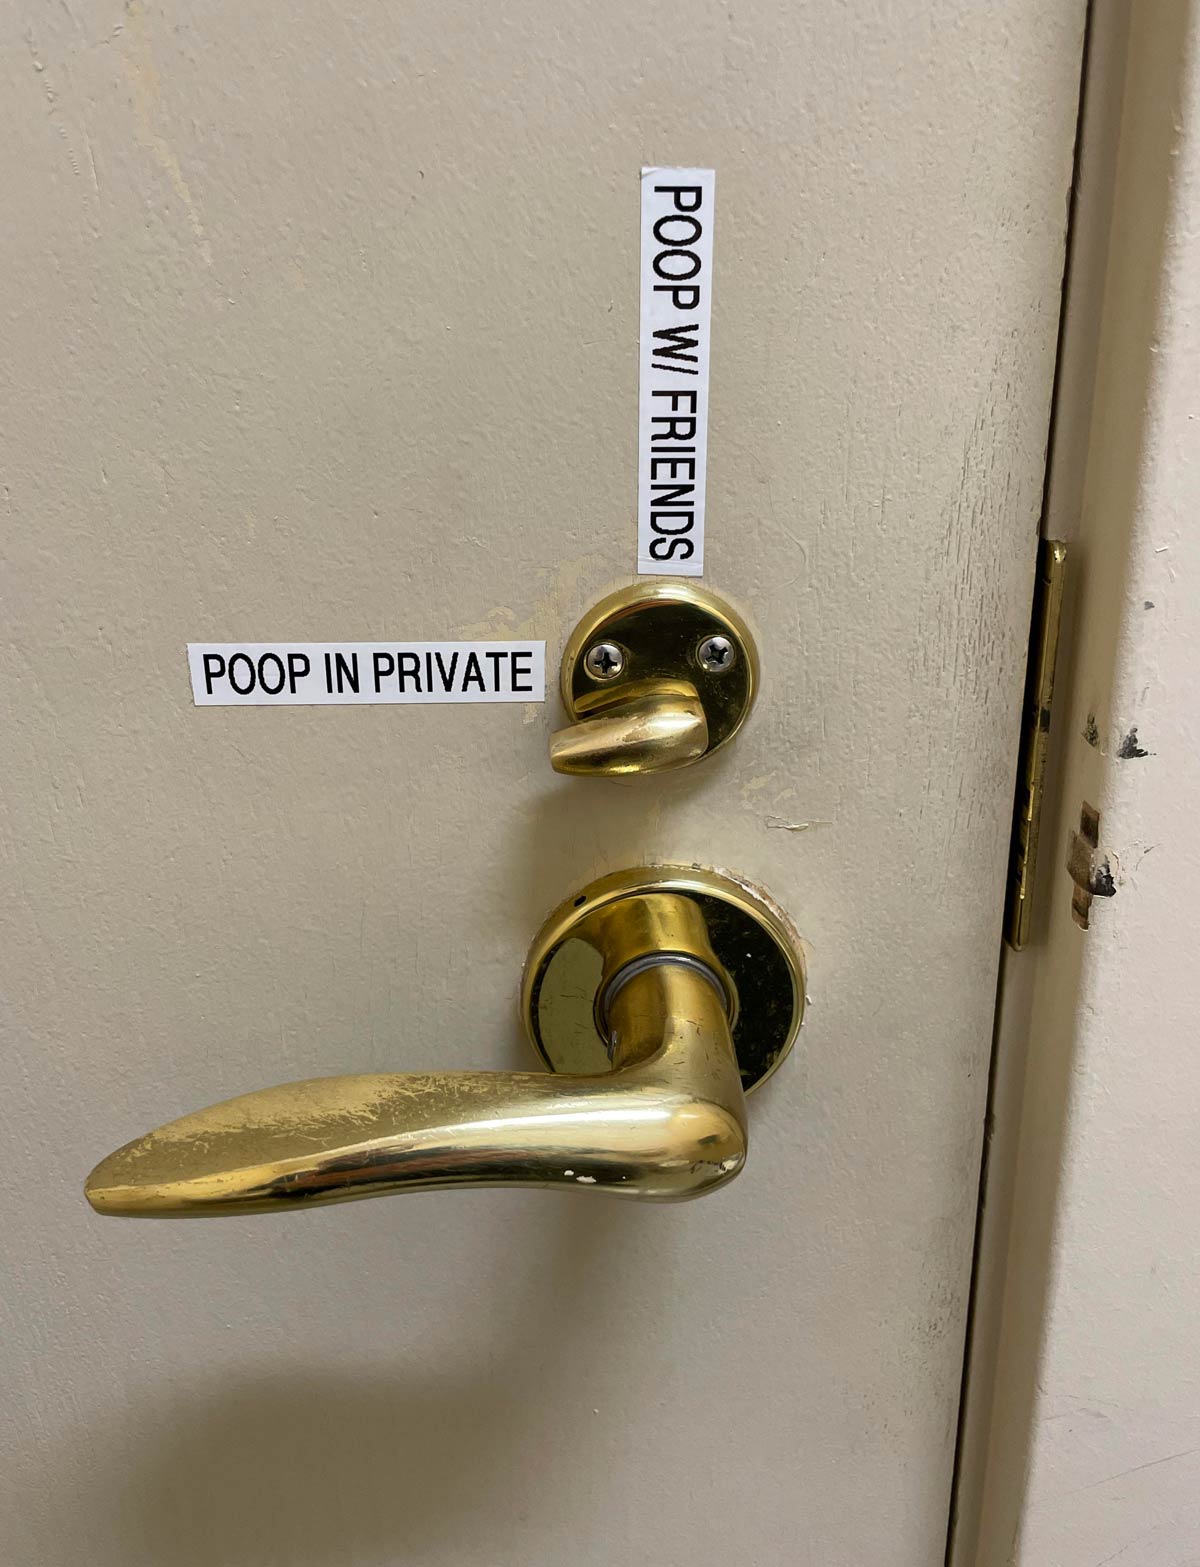 Our facility manager solved all of our confusion with the bathroom lock